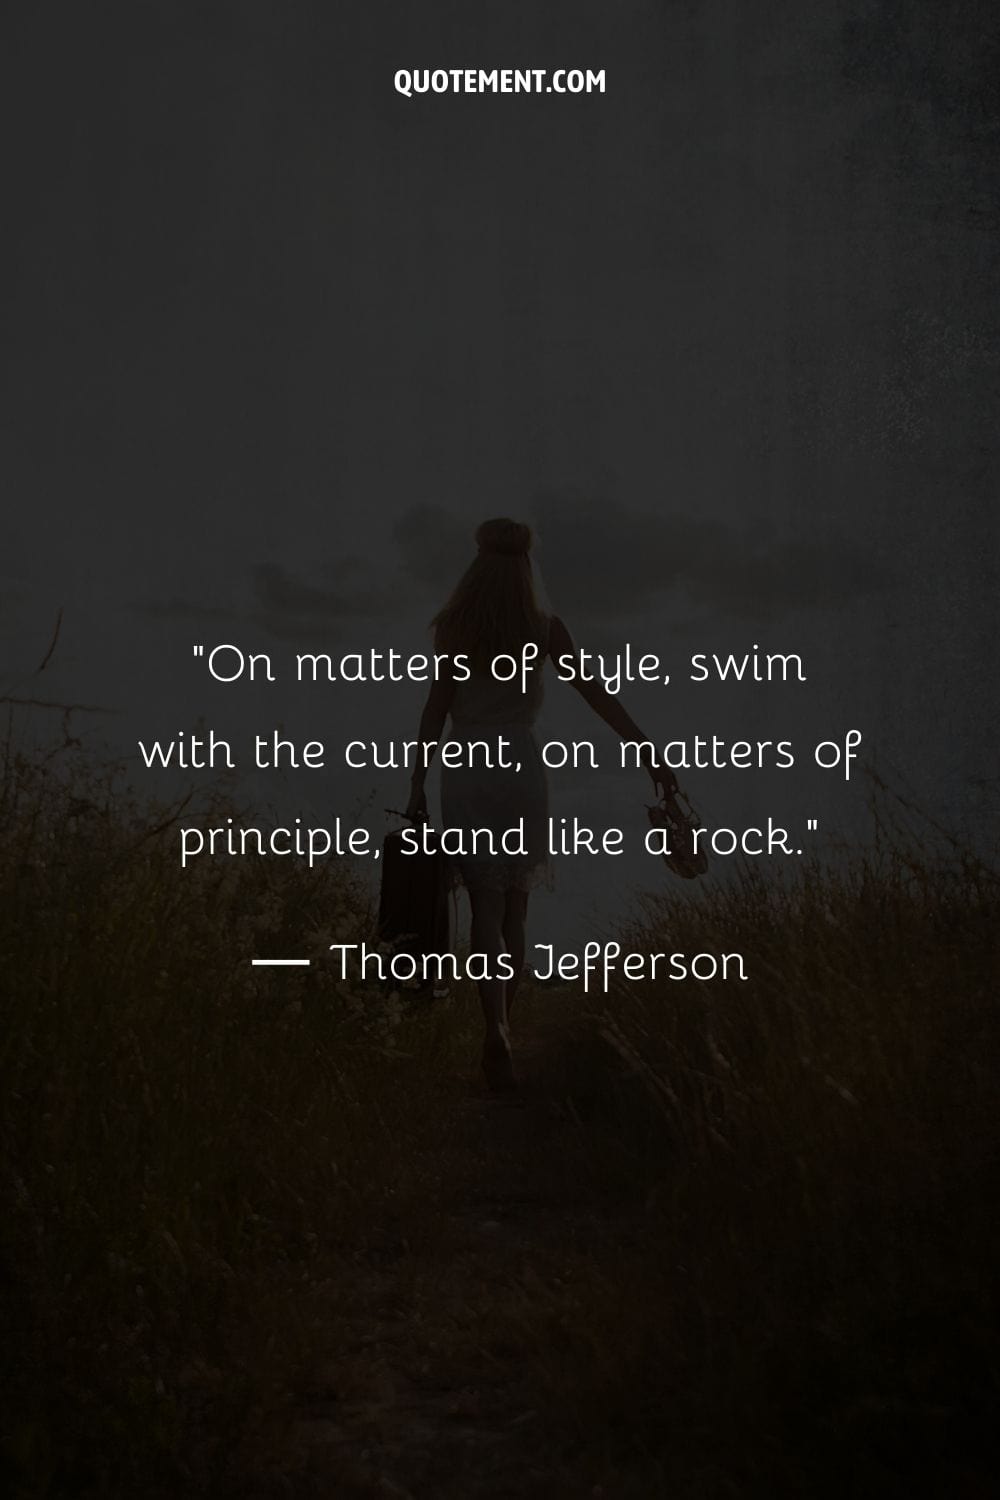 On matters of style, swim with the current, on matters of principle, stand like a rock